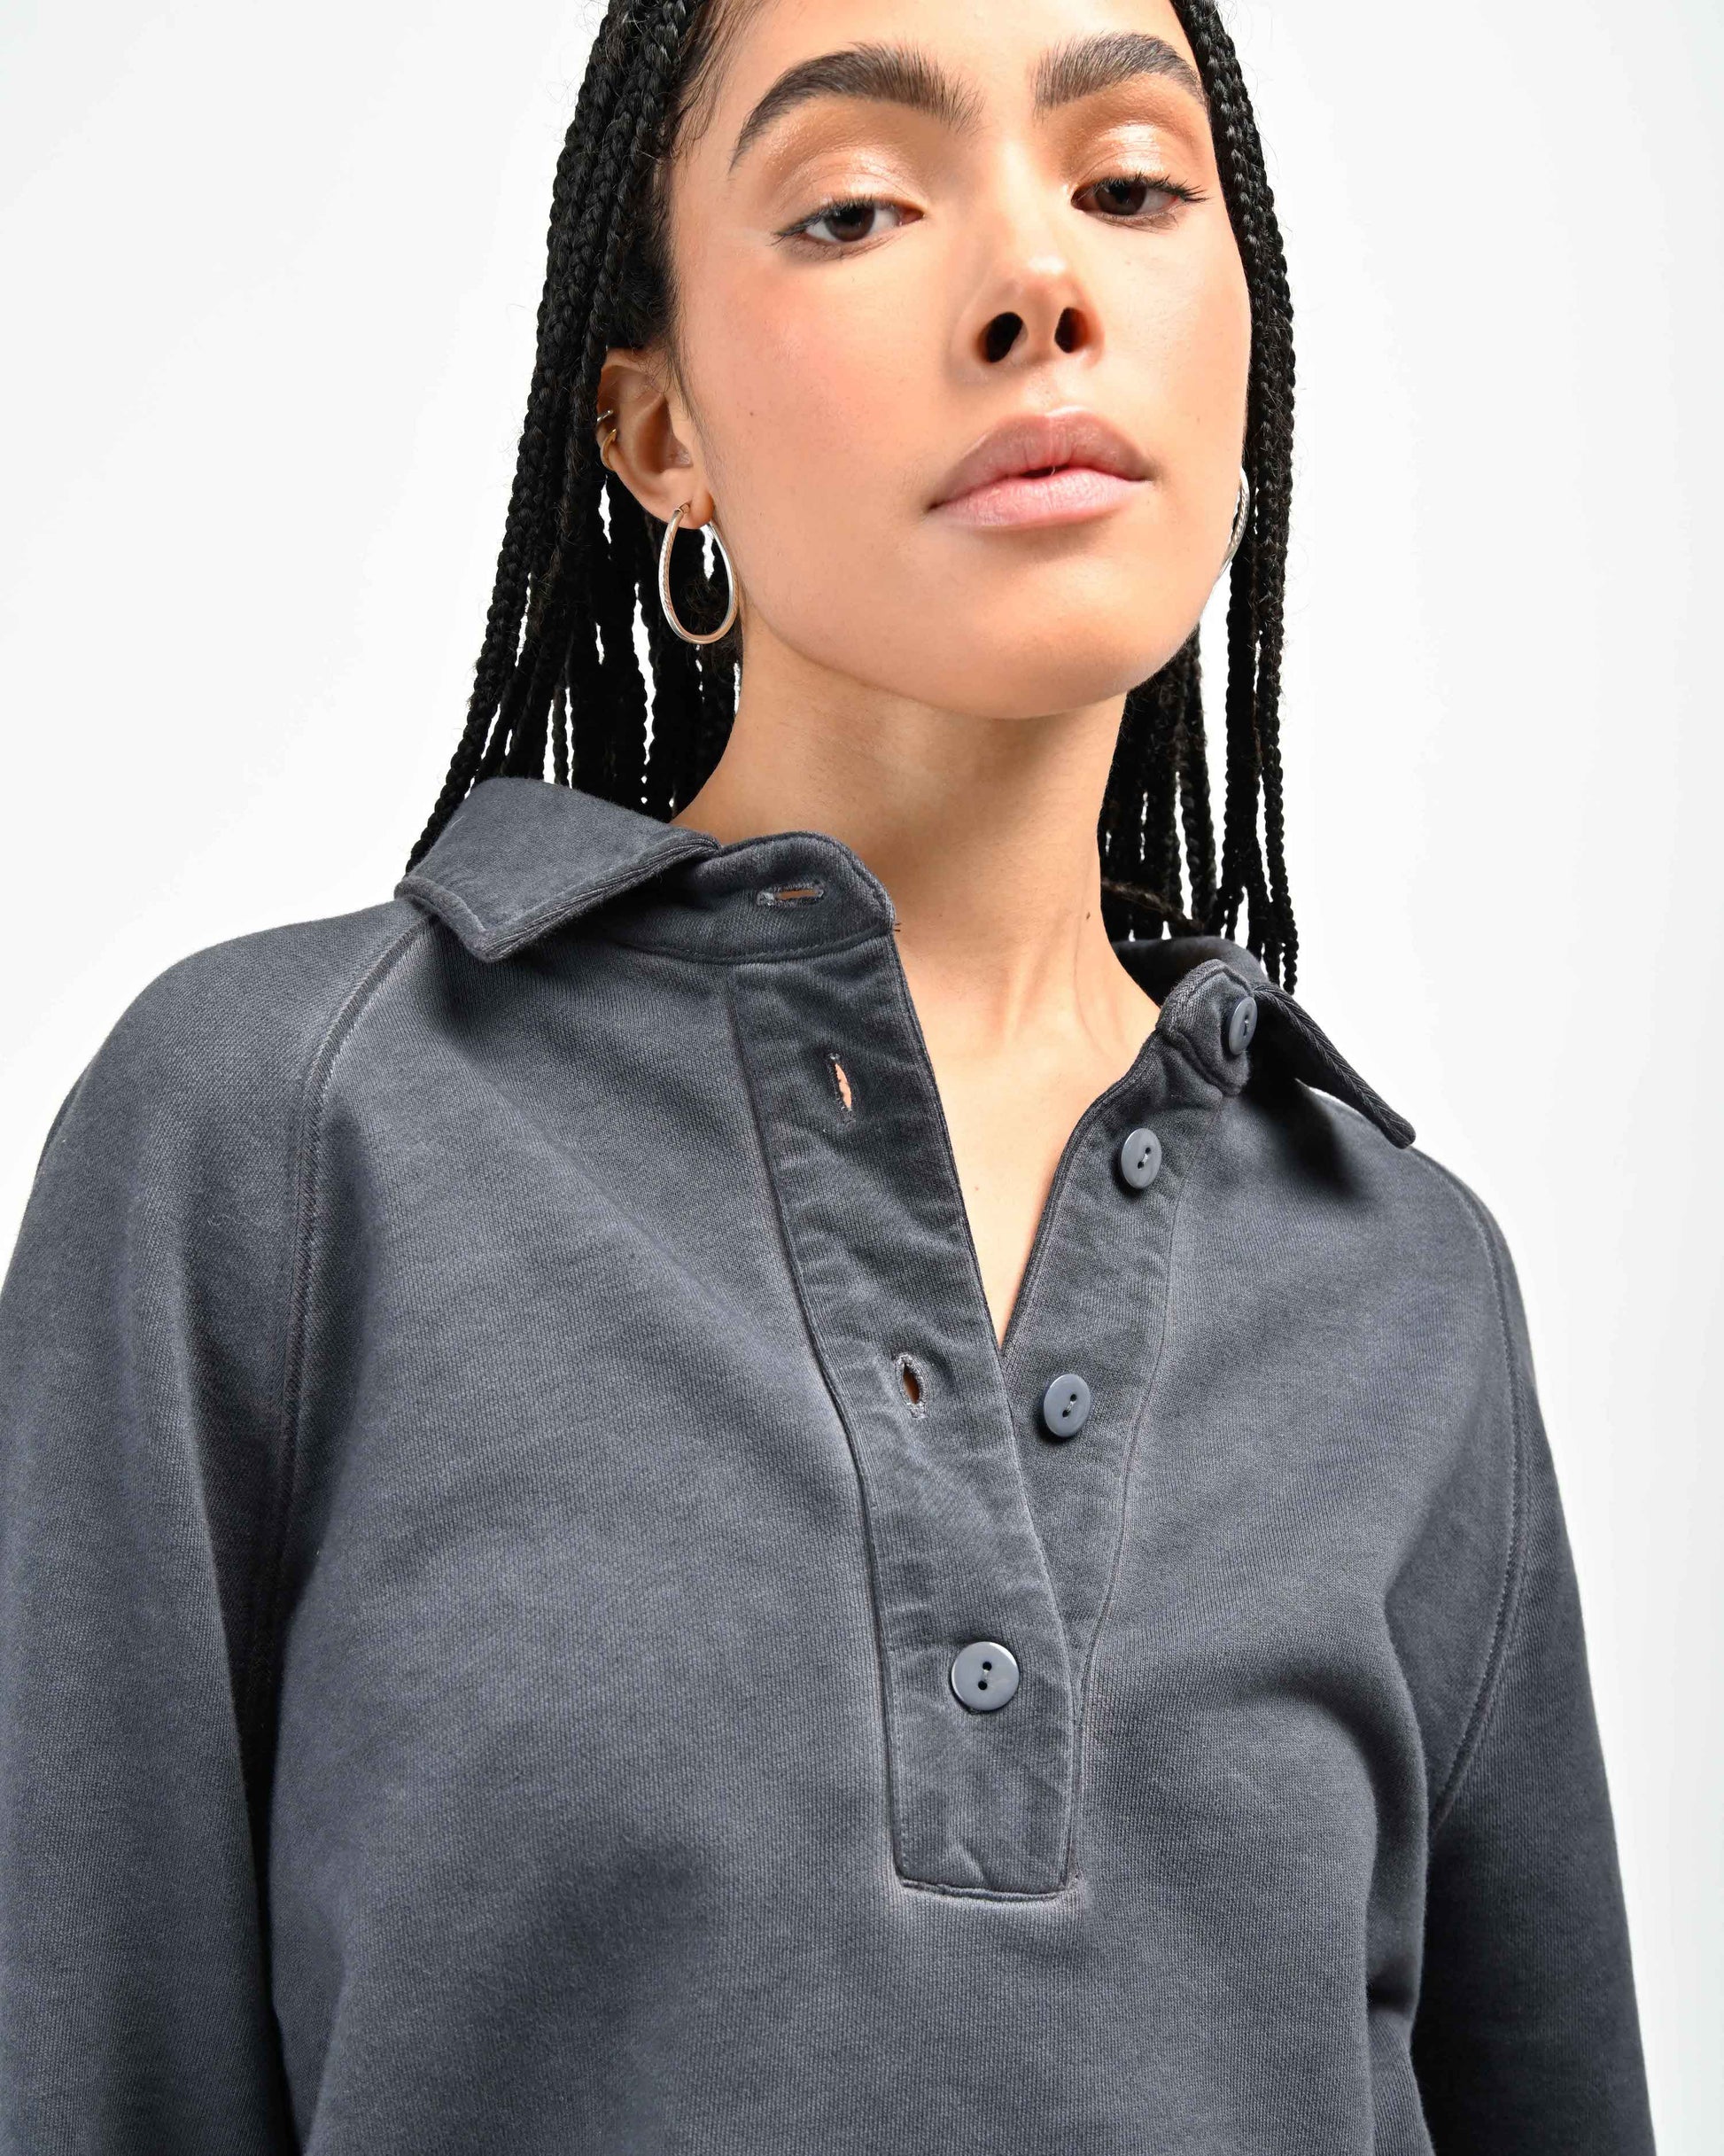 Detail View of Mother of Pearl Buttons on August Pullover Sweatshirt by Aseye Studio worn by model